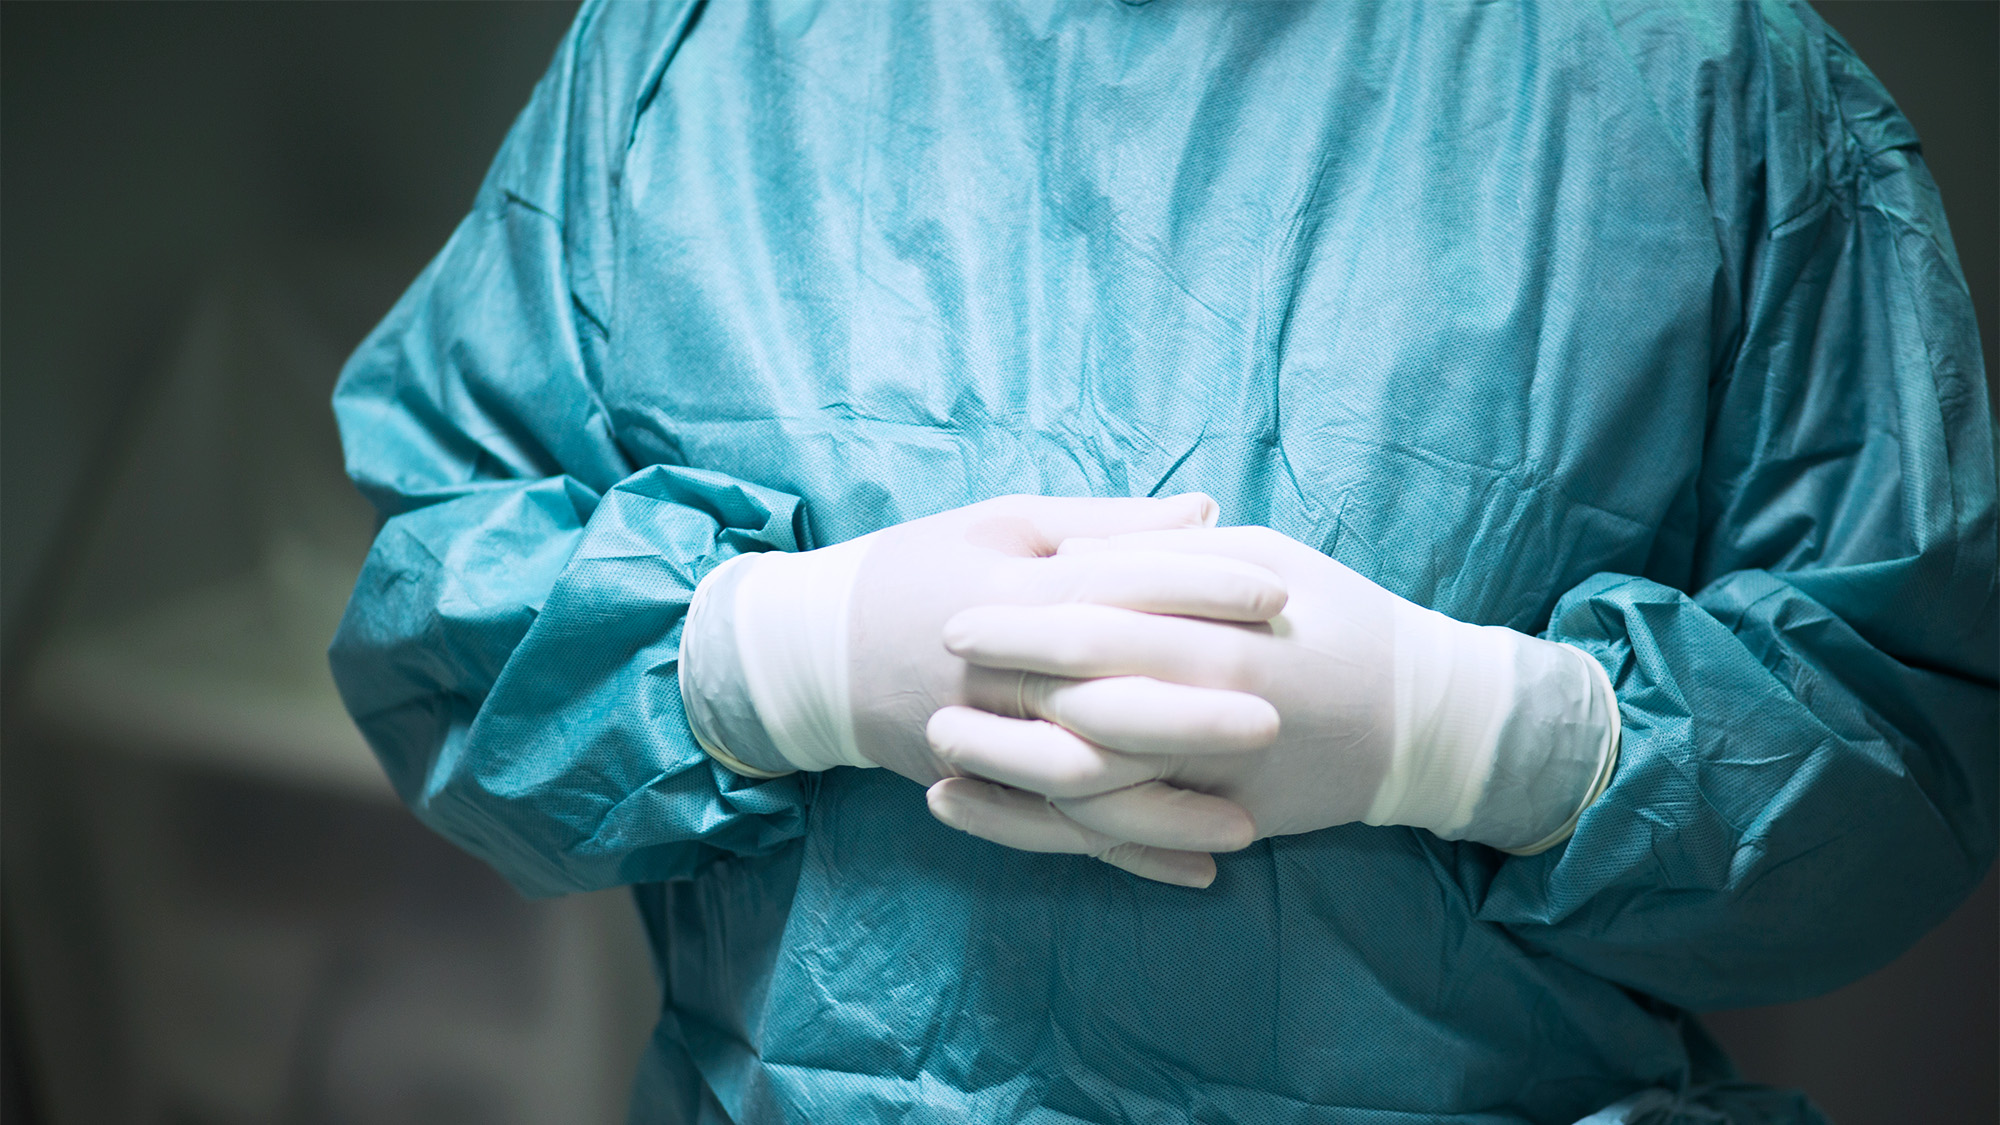 A person in surgical garb folds their gloved hands